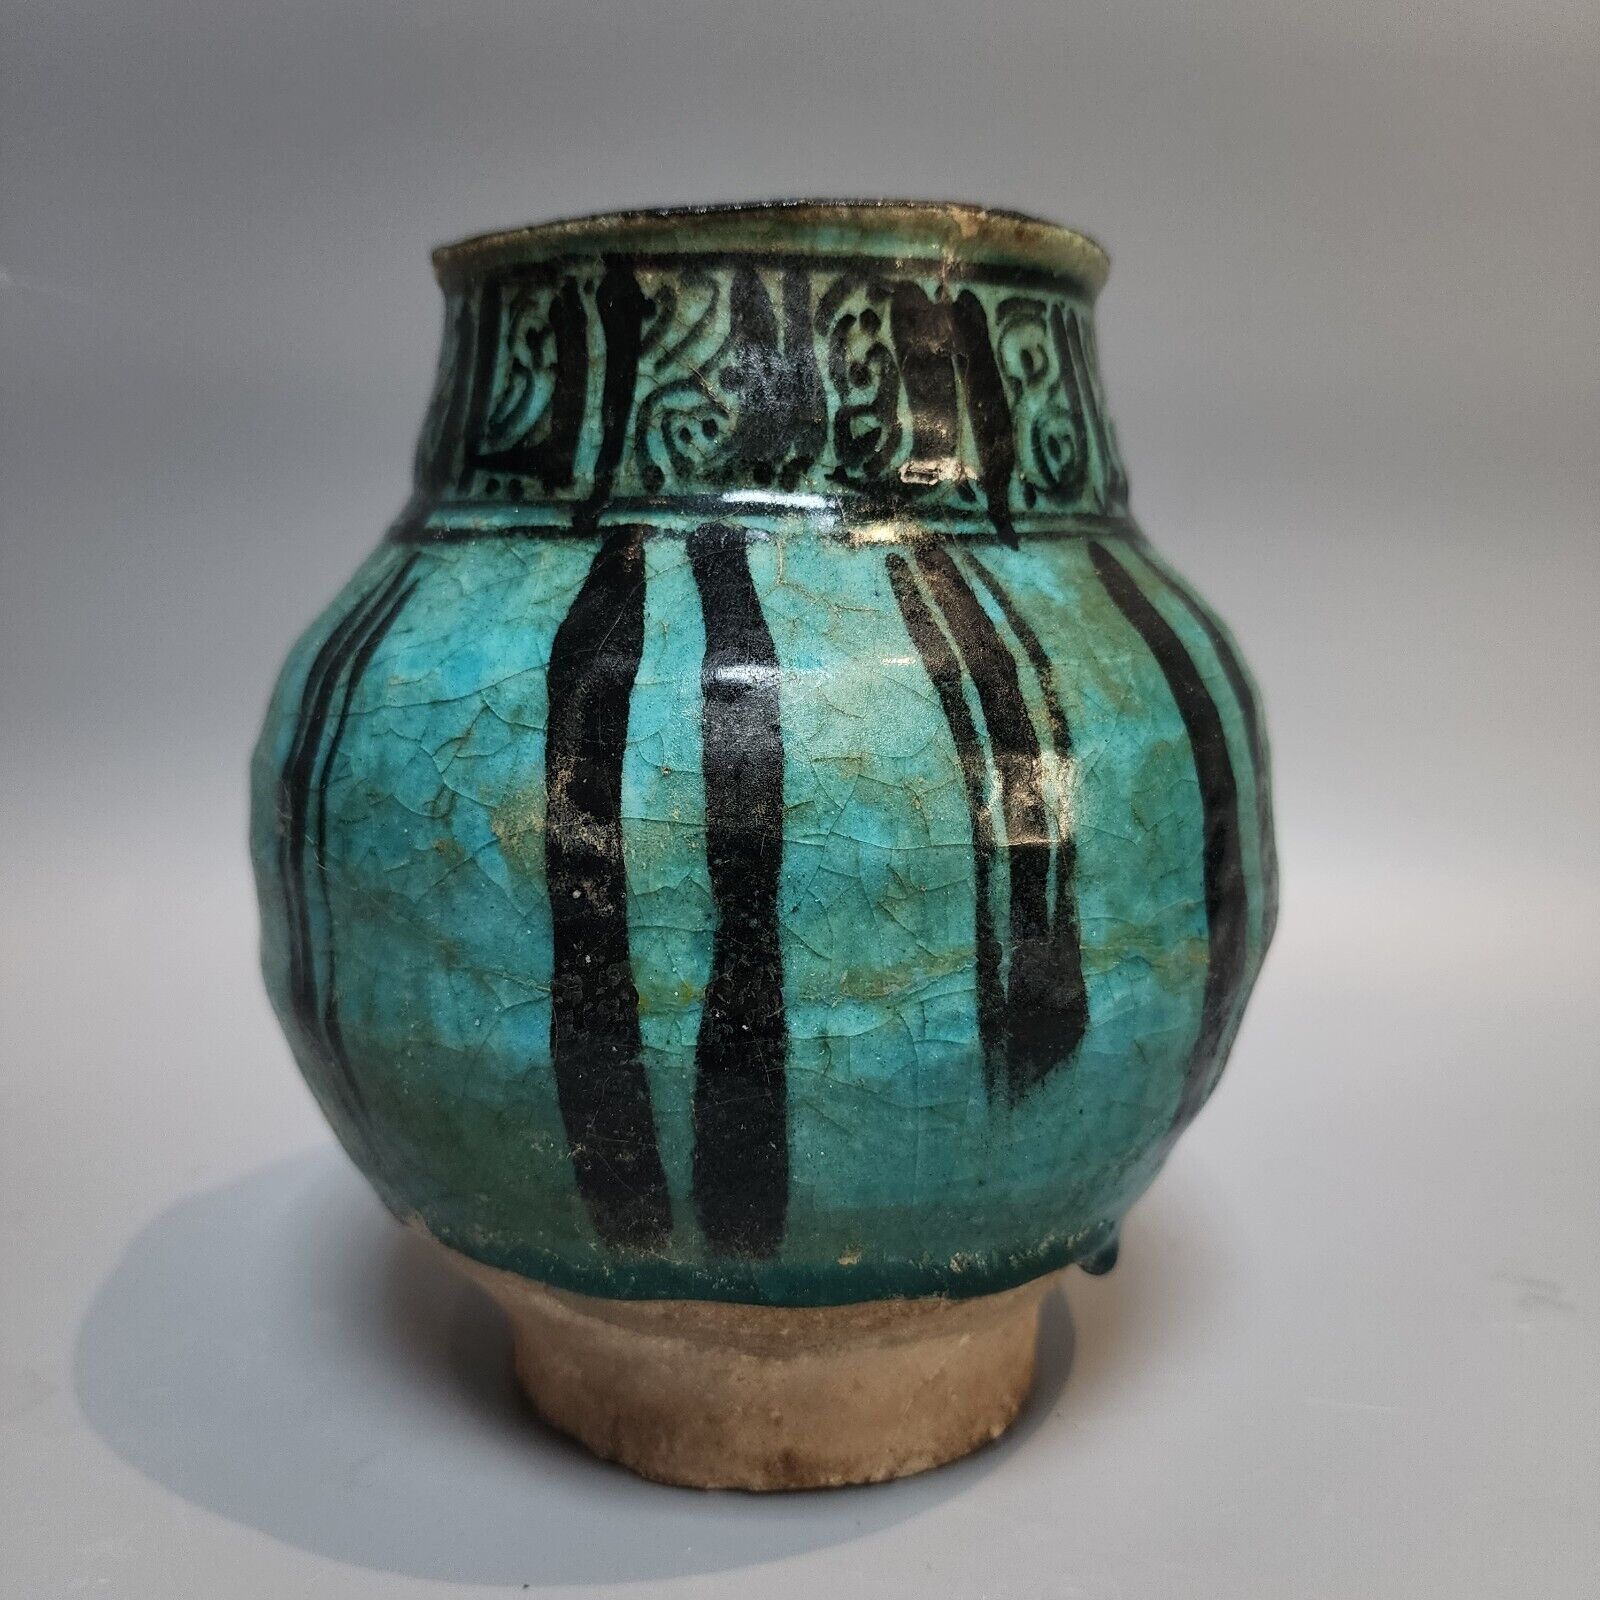 A 12TH-13TH CENTURY IMPORTANT LARGE KASHAN POTTERY TURQUOISE KUFIC VESSEL. 